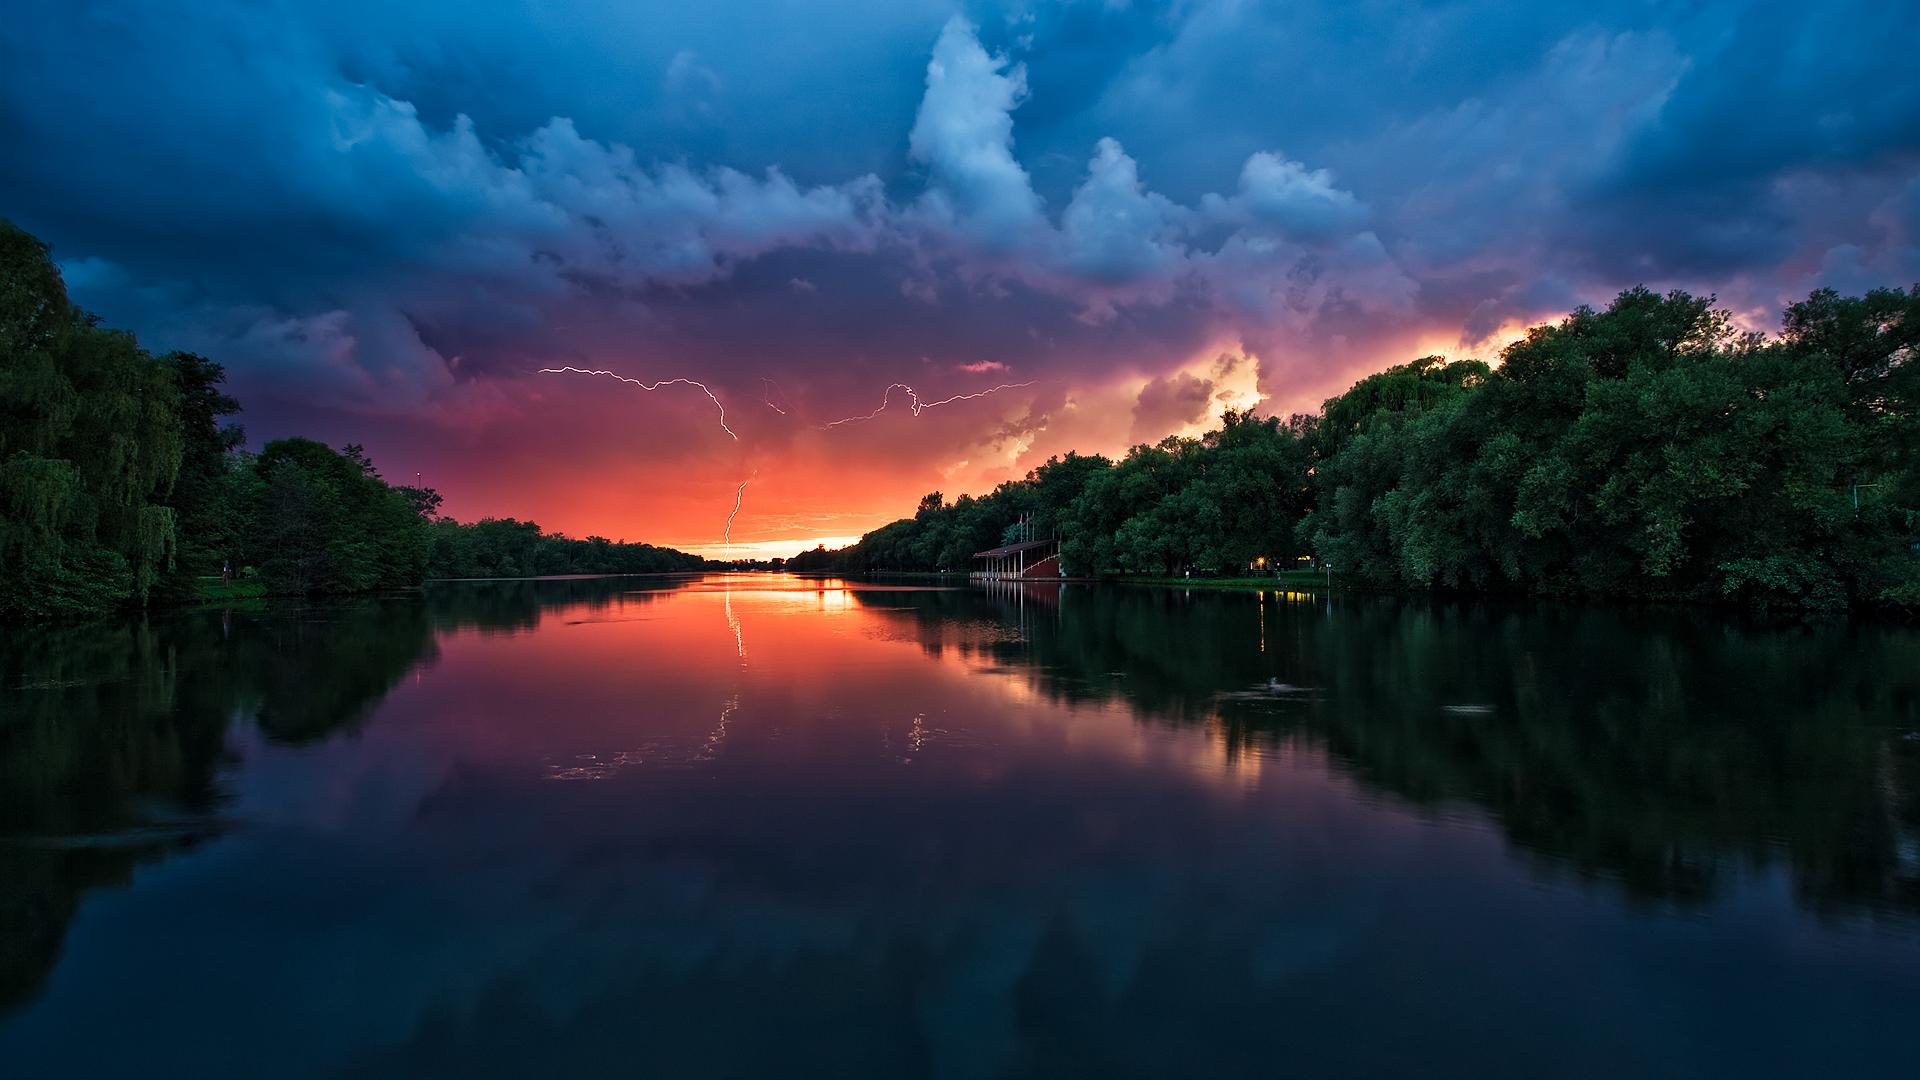 Sunset storm over the river 1920 × 1080